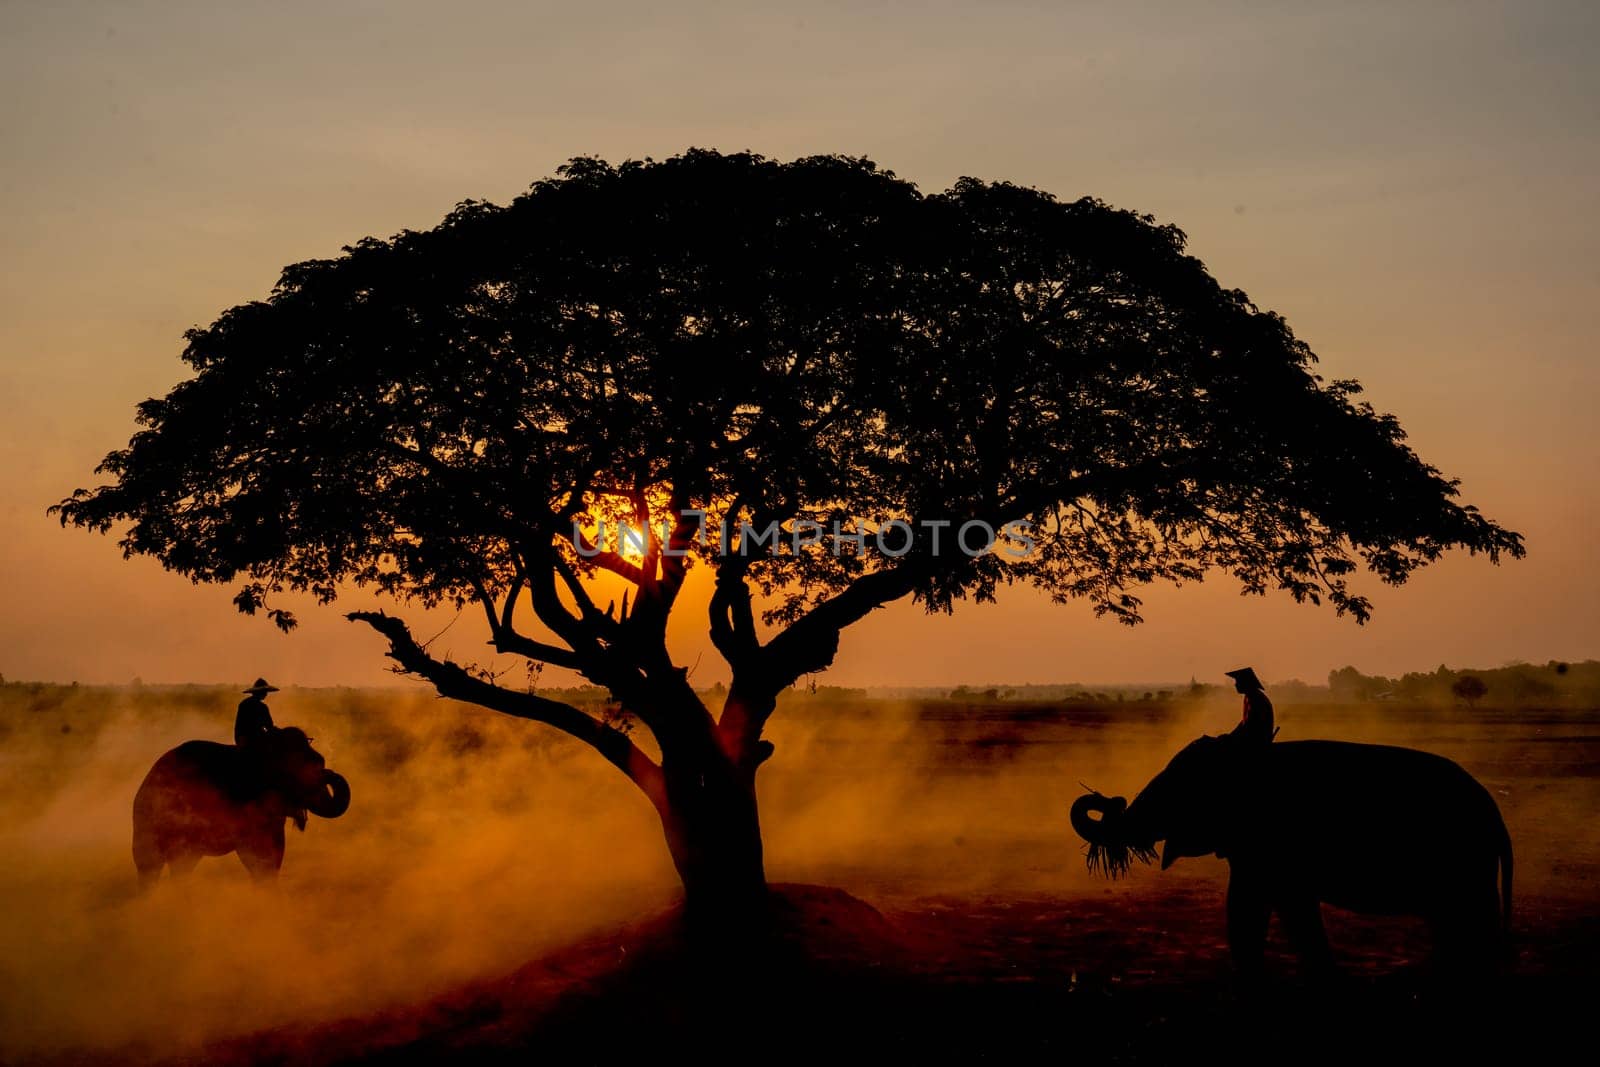 Two elephants with mahout stand near beautiful big tree in rice field with sunrise and mist in concept of relationship between human and animal in Asian country. by nrradmin